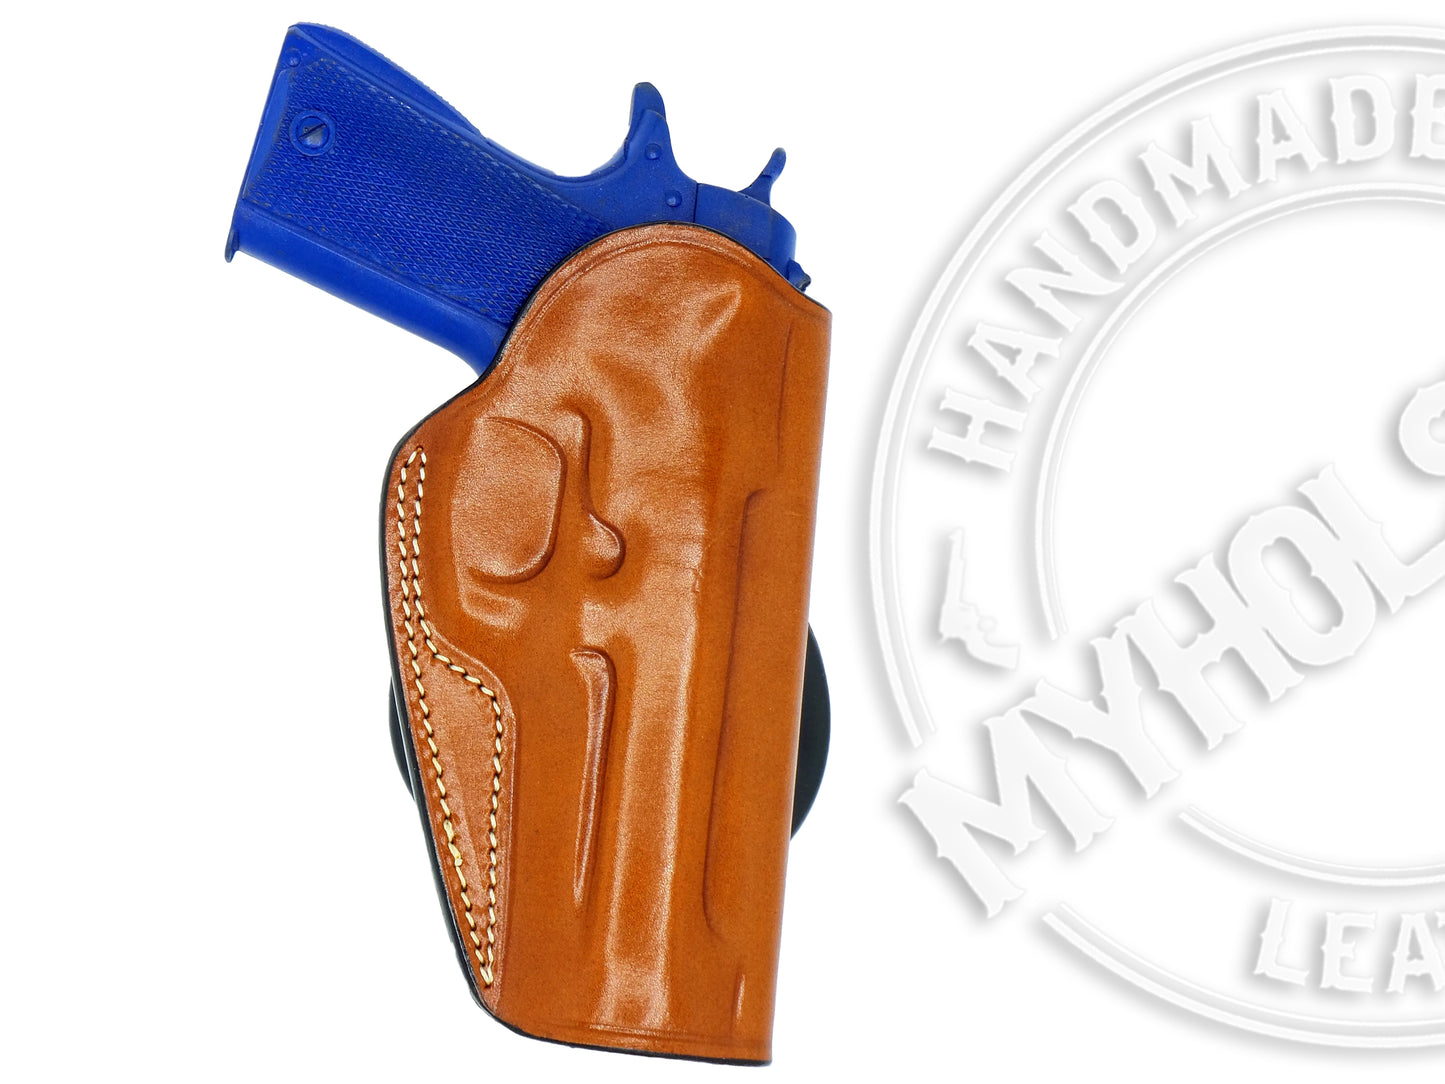 CZ P-01 OMEGA OWB Quick Draw Right Hand Leather Paddle Holster